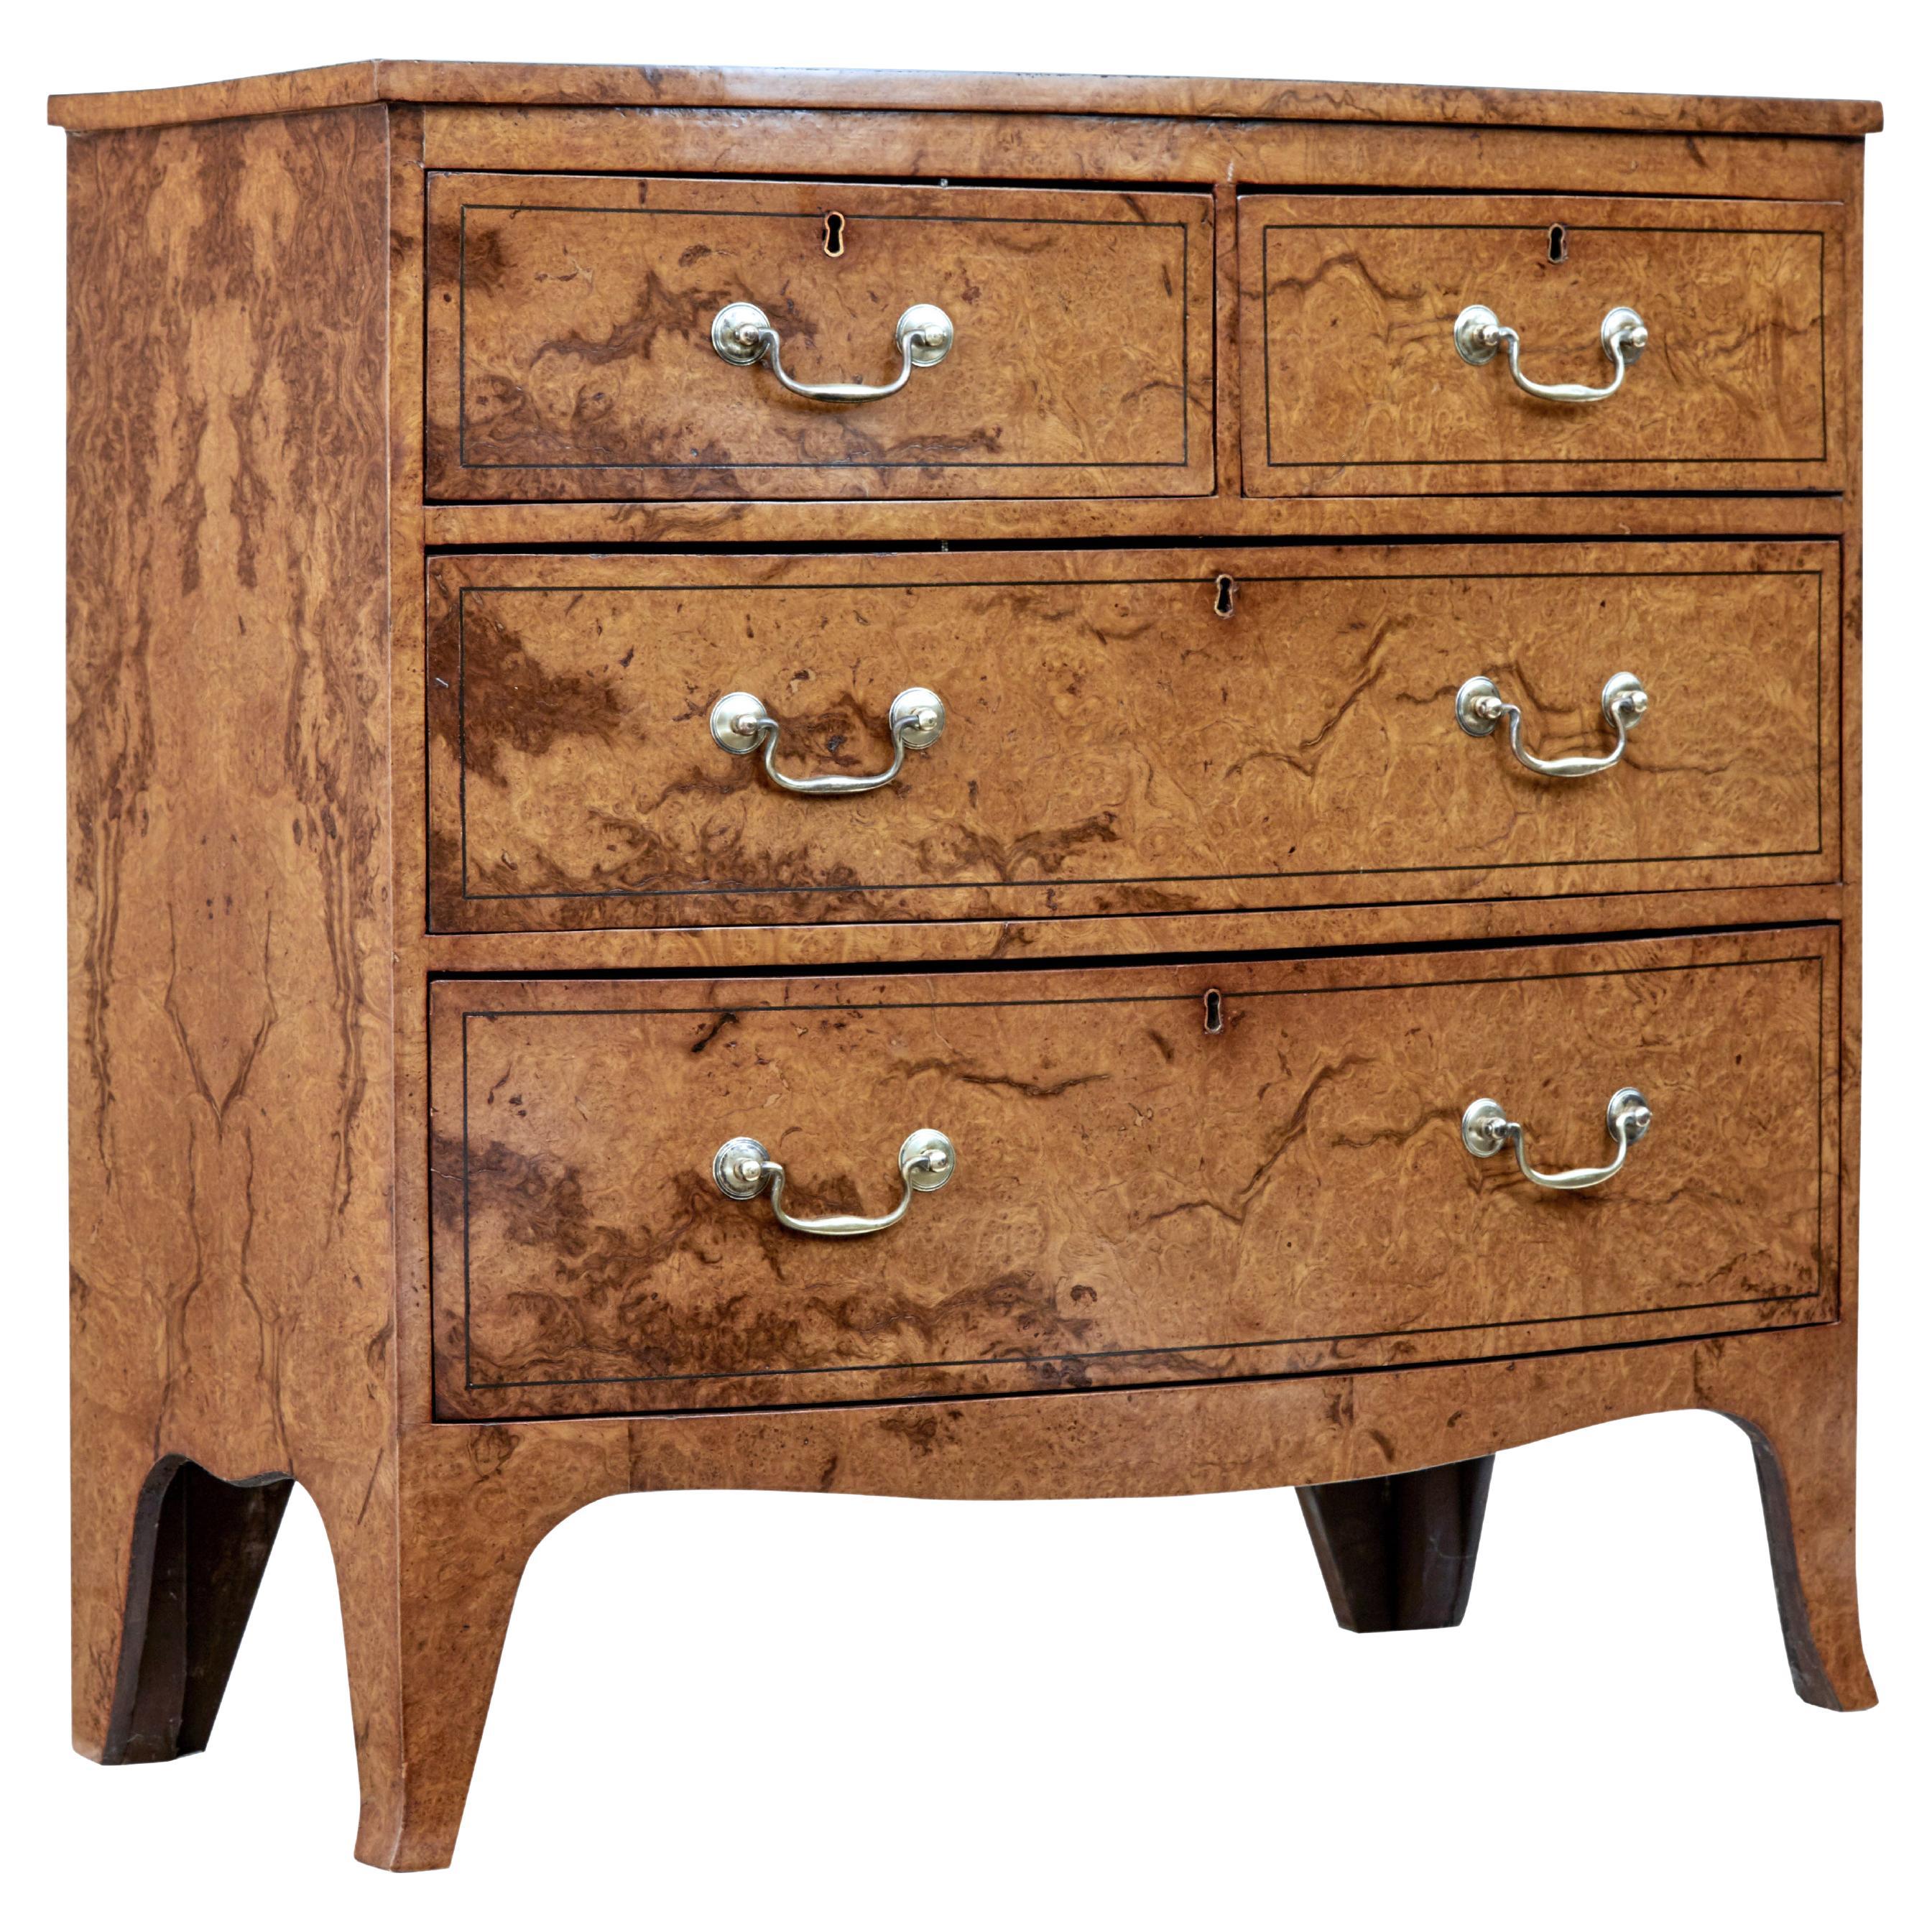 English Burr Walnut Bow Front Chest of Drawers circa 1870 with Bookmatch Veneer For Sale